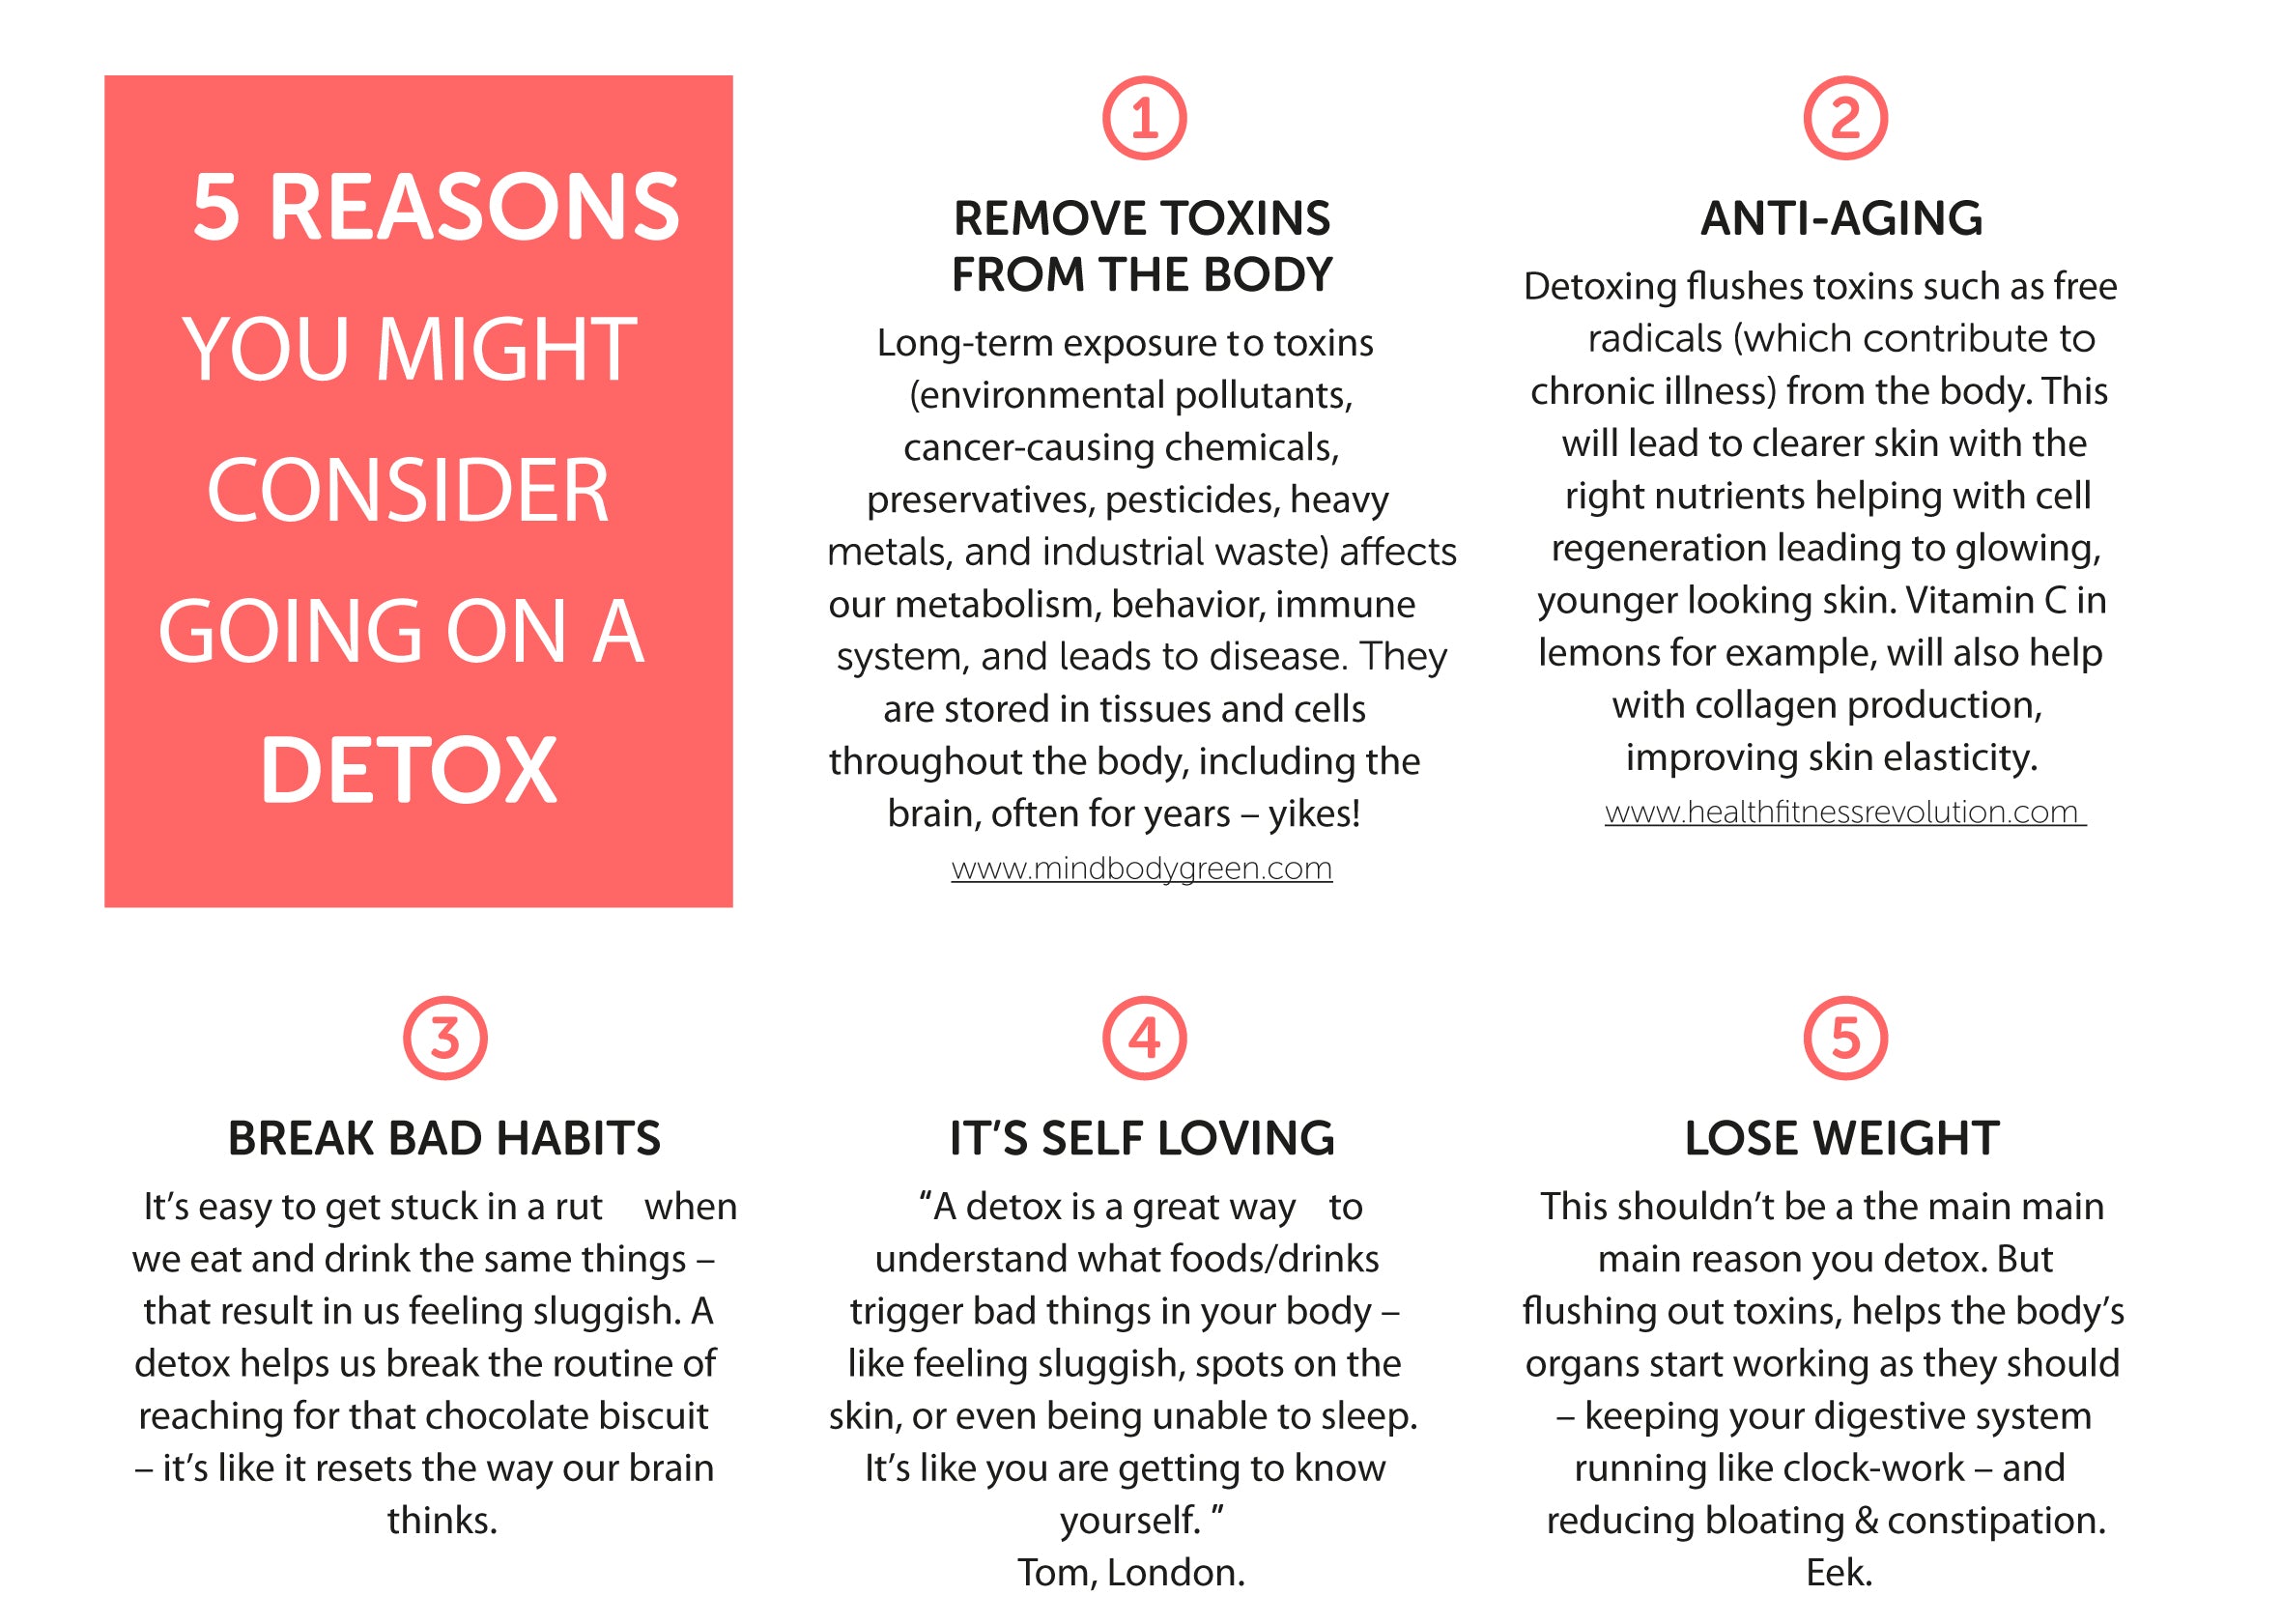 5 Reasons you might choose to detox